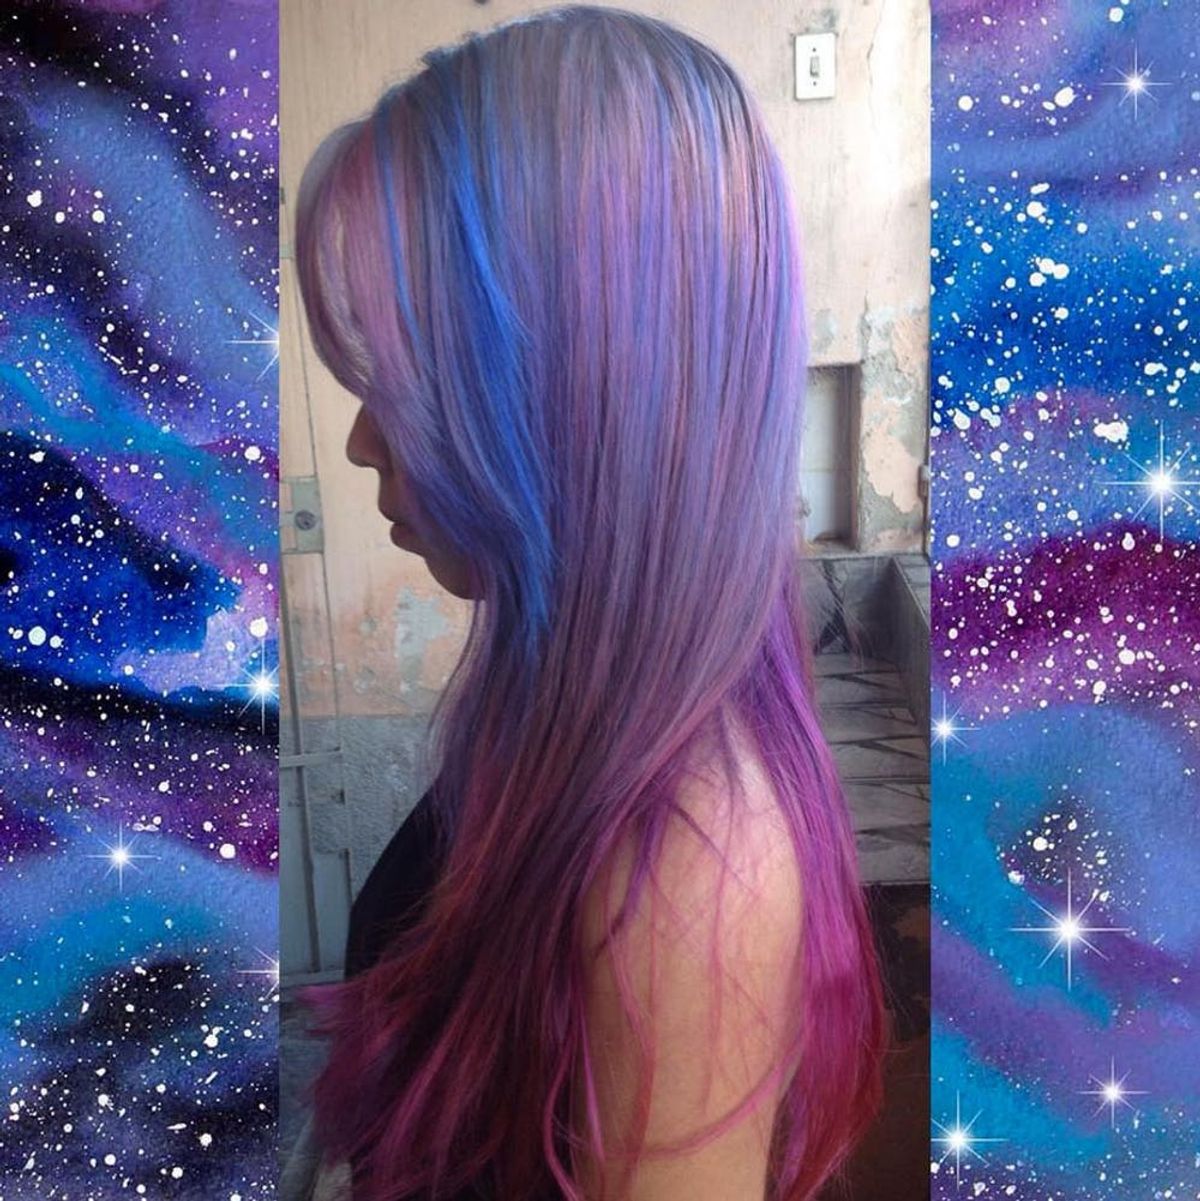 This Beautiful New Hair Color Trend Is *So* Far Out